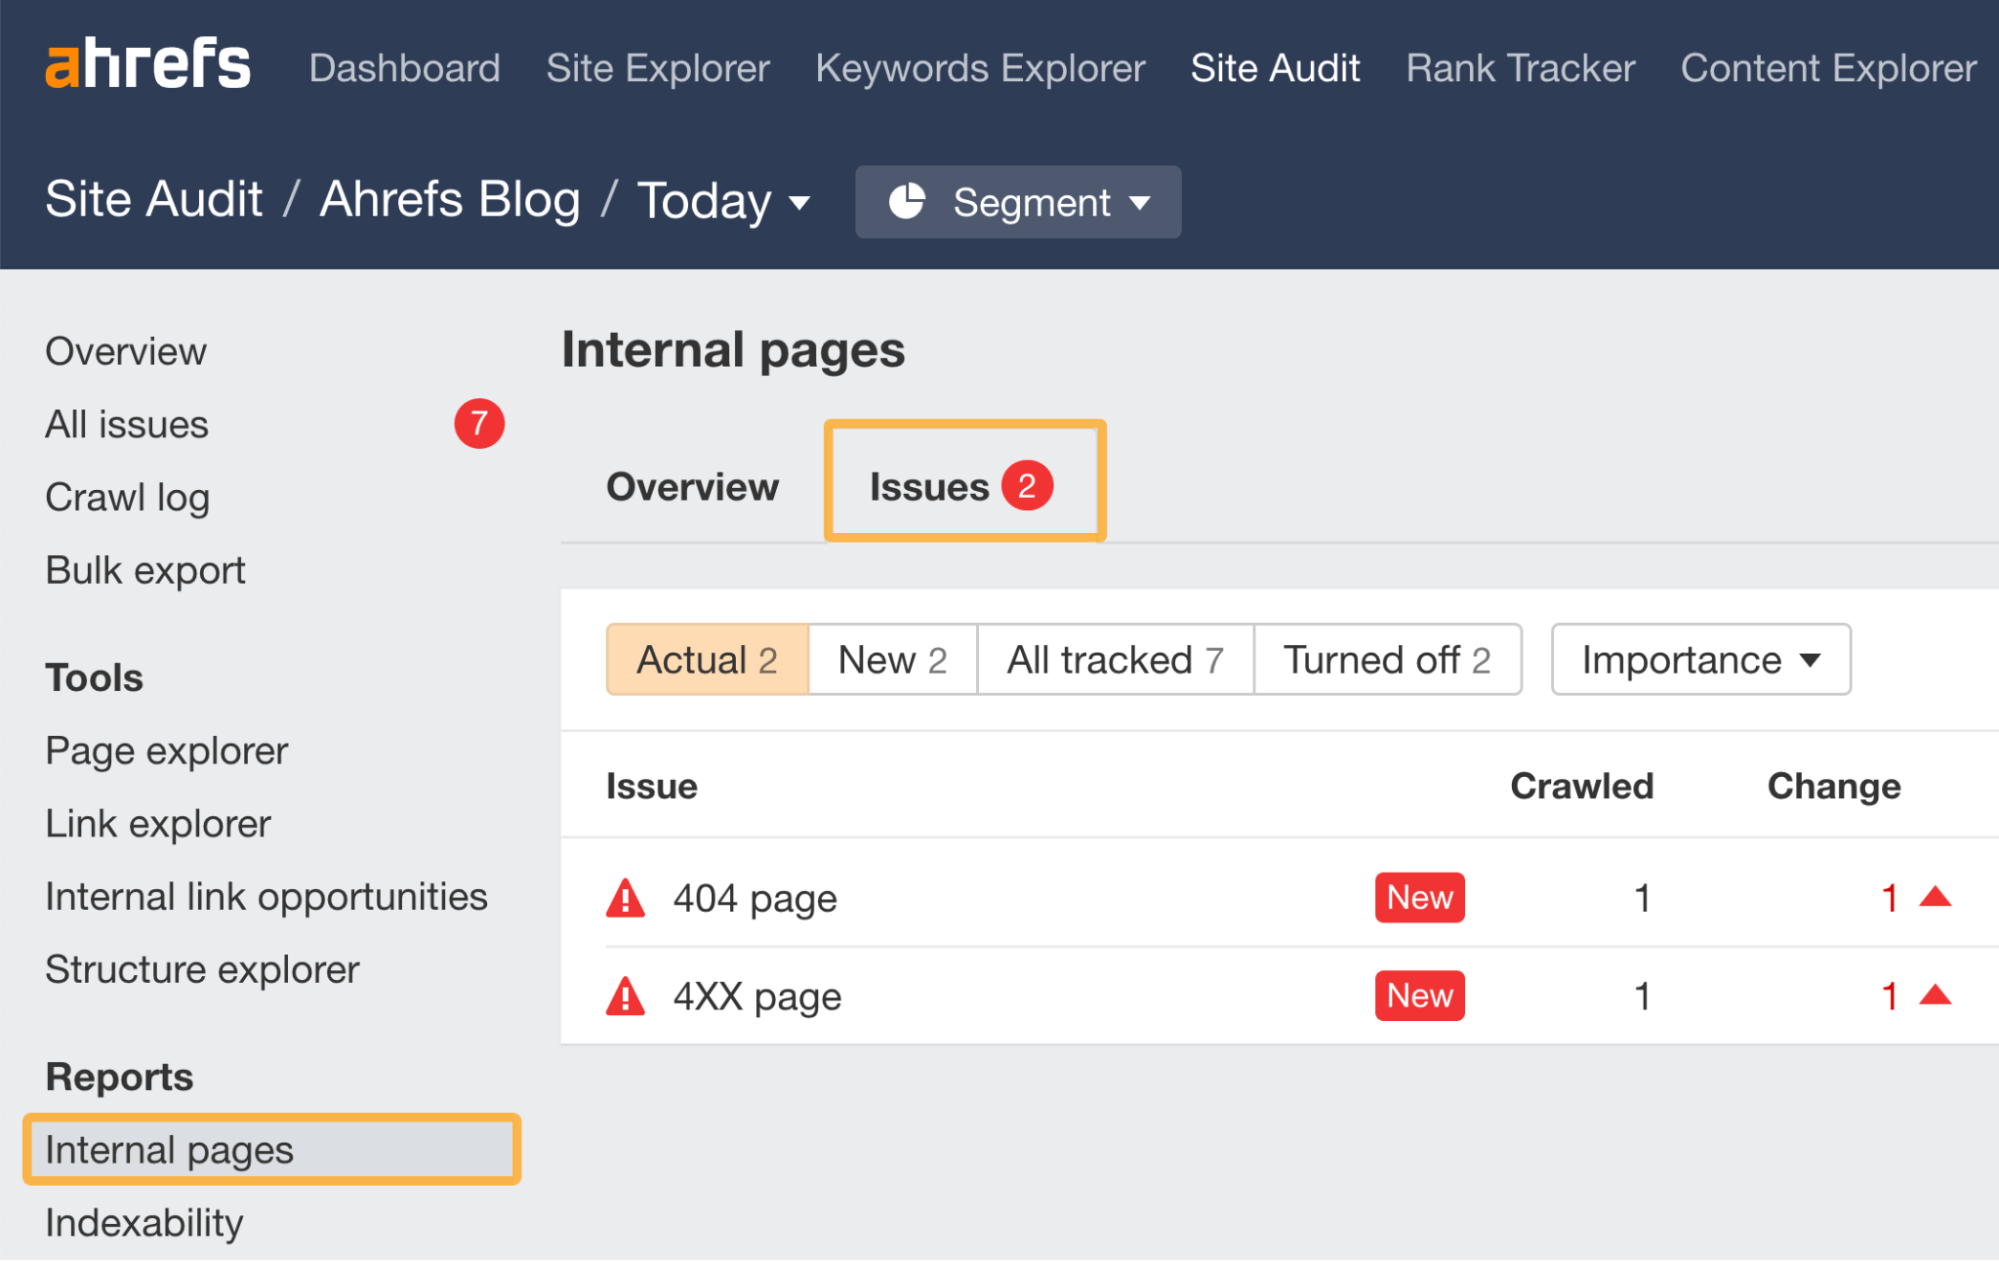 4XX issues in Internal pages report, via Ahrefs' Site Audit
